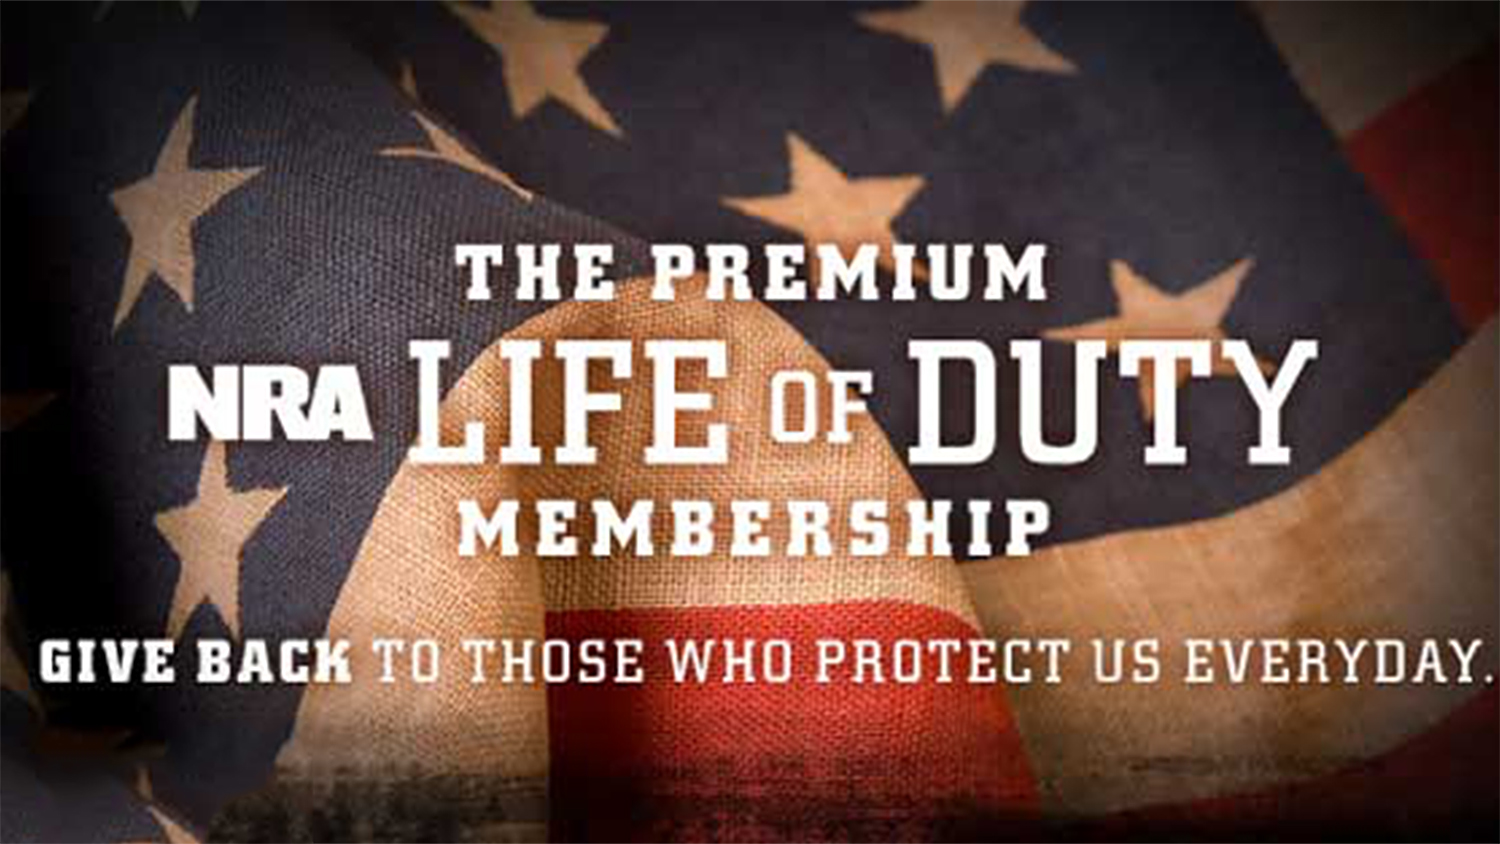 NRA Membership Benefits For Our Heroes